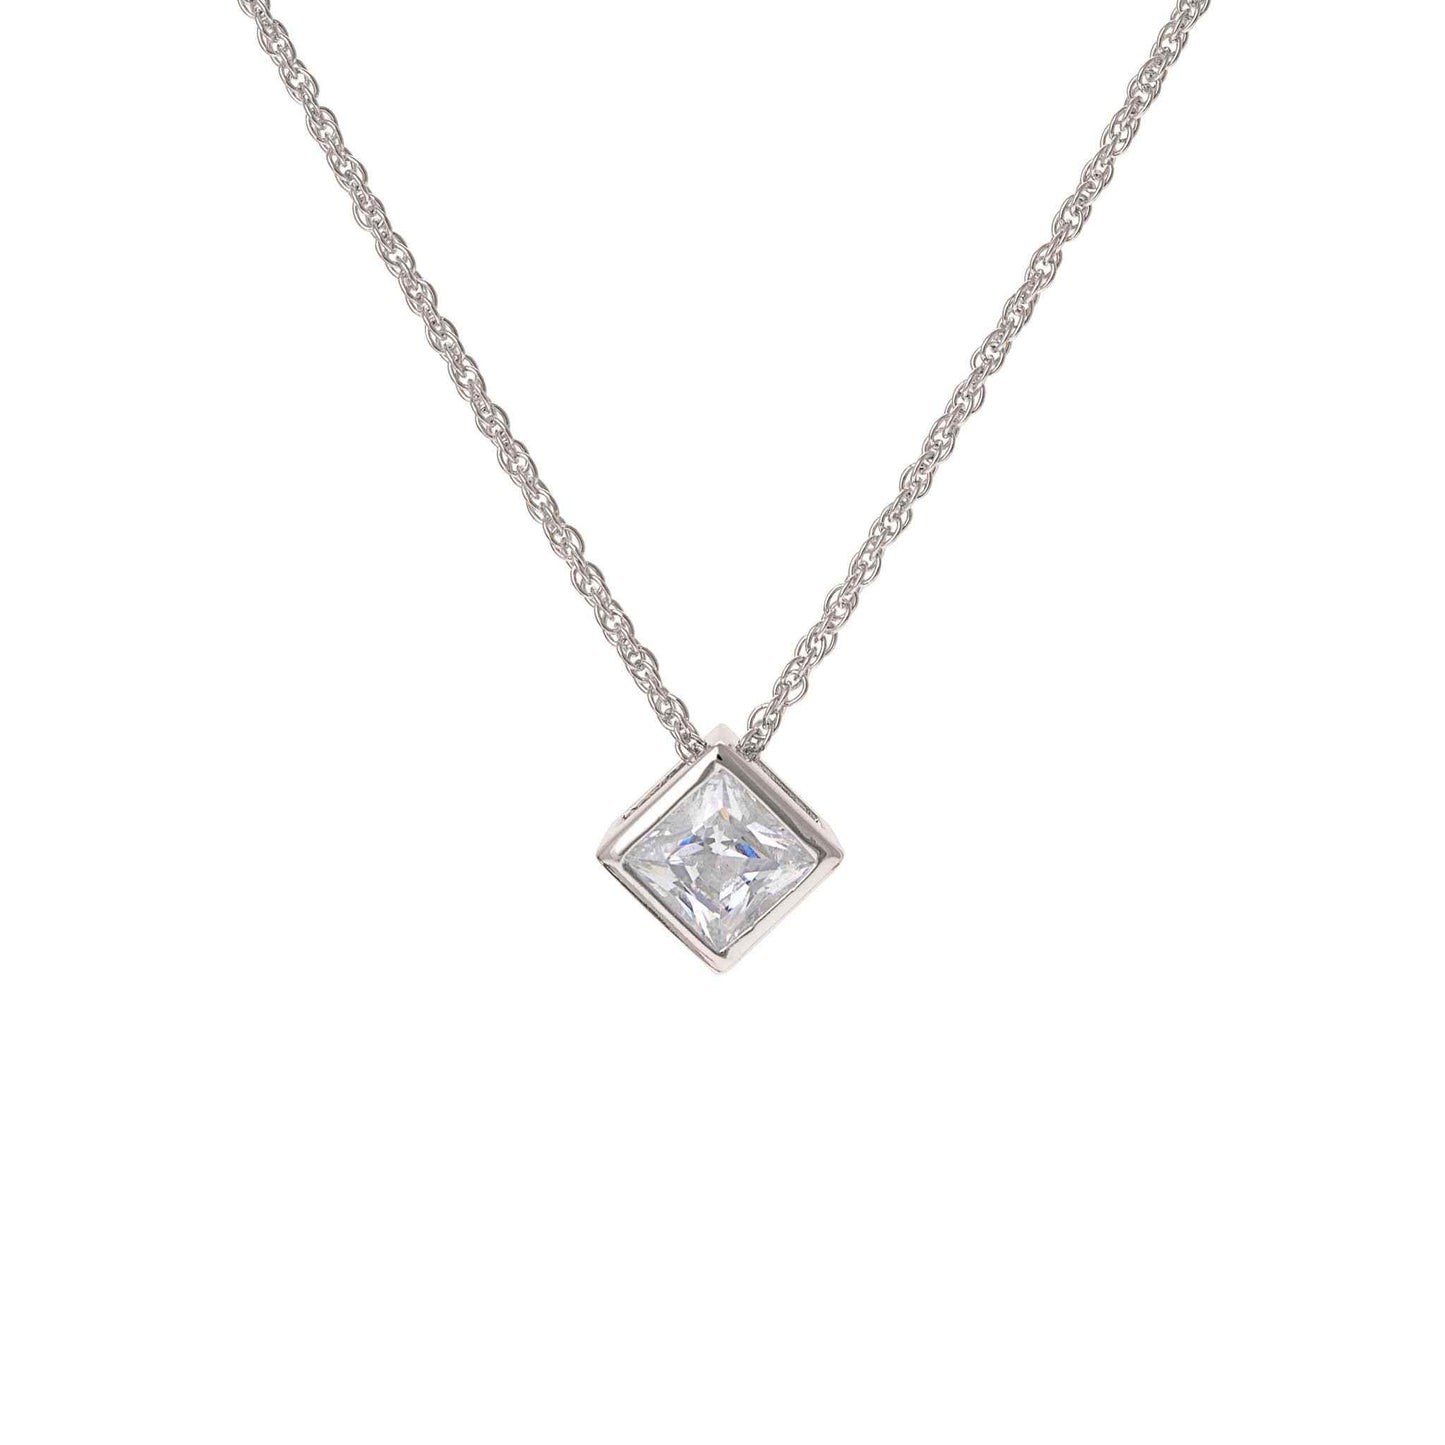 A bezel set princess cut simulated diamond necklace displayed on a neutral white background.